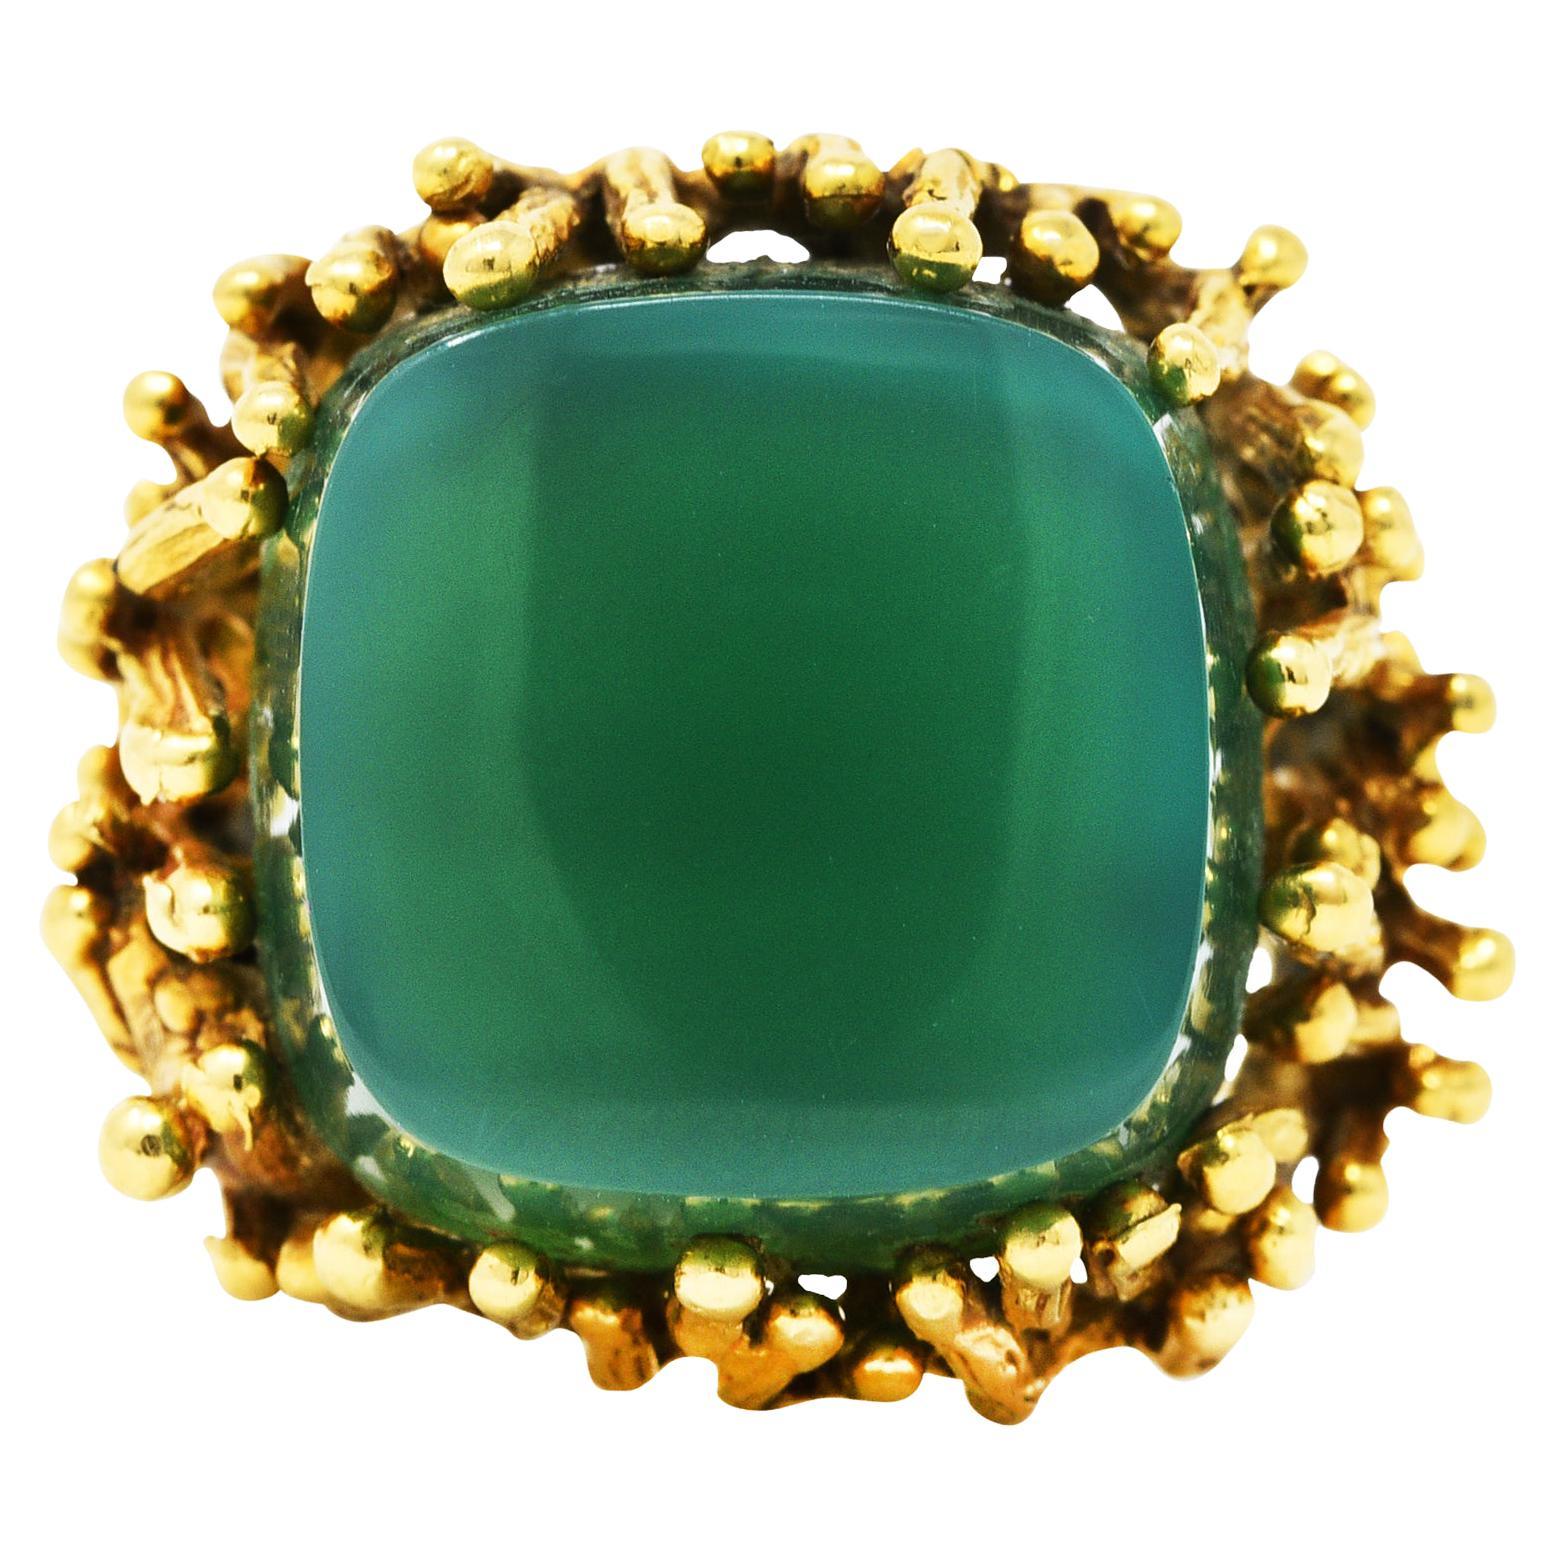 Ring is comprised of branching organic tendril forms centering a prong set chrysoprase

Tablet is cushion shaped and deeply cut - translucent and strongly blueish green in color

With grooved texture throughout

Stamped 750 for 18 karat